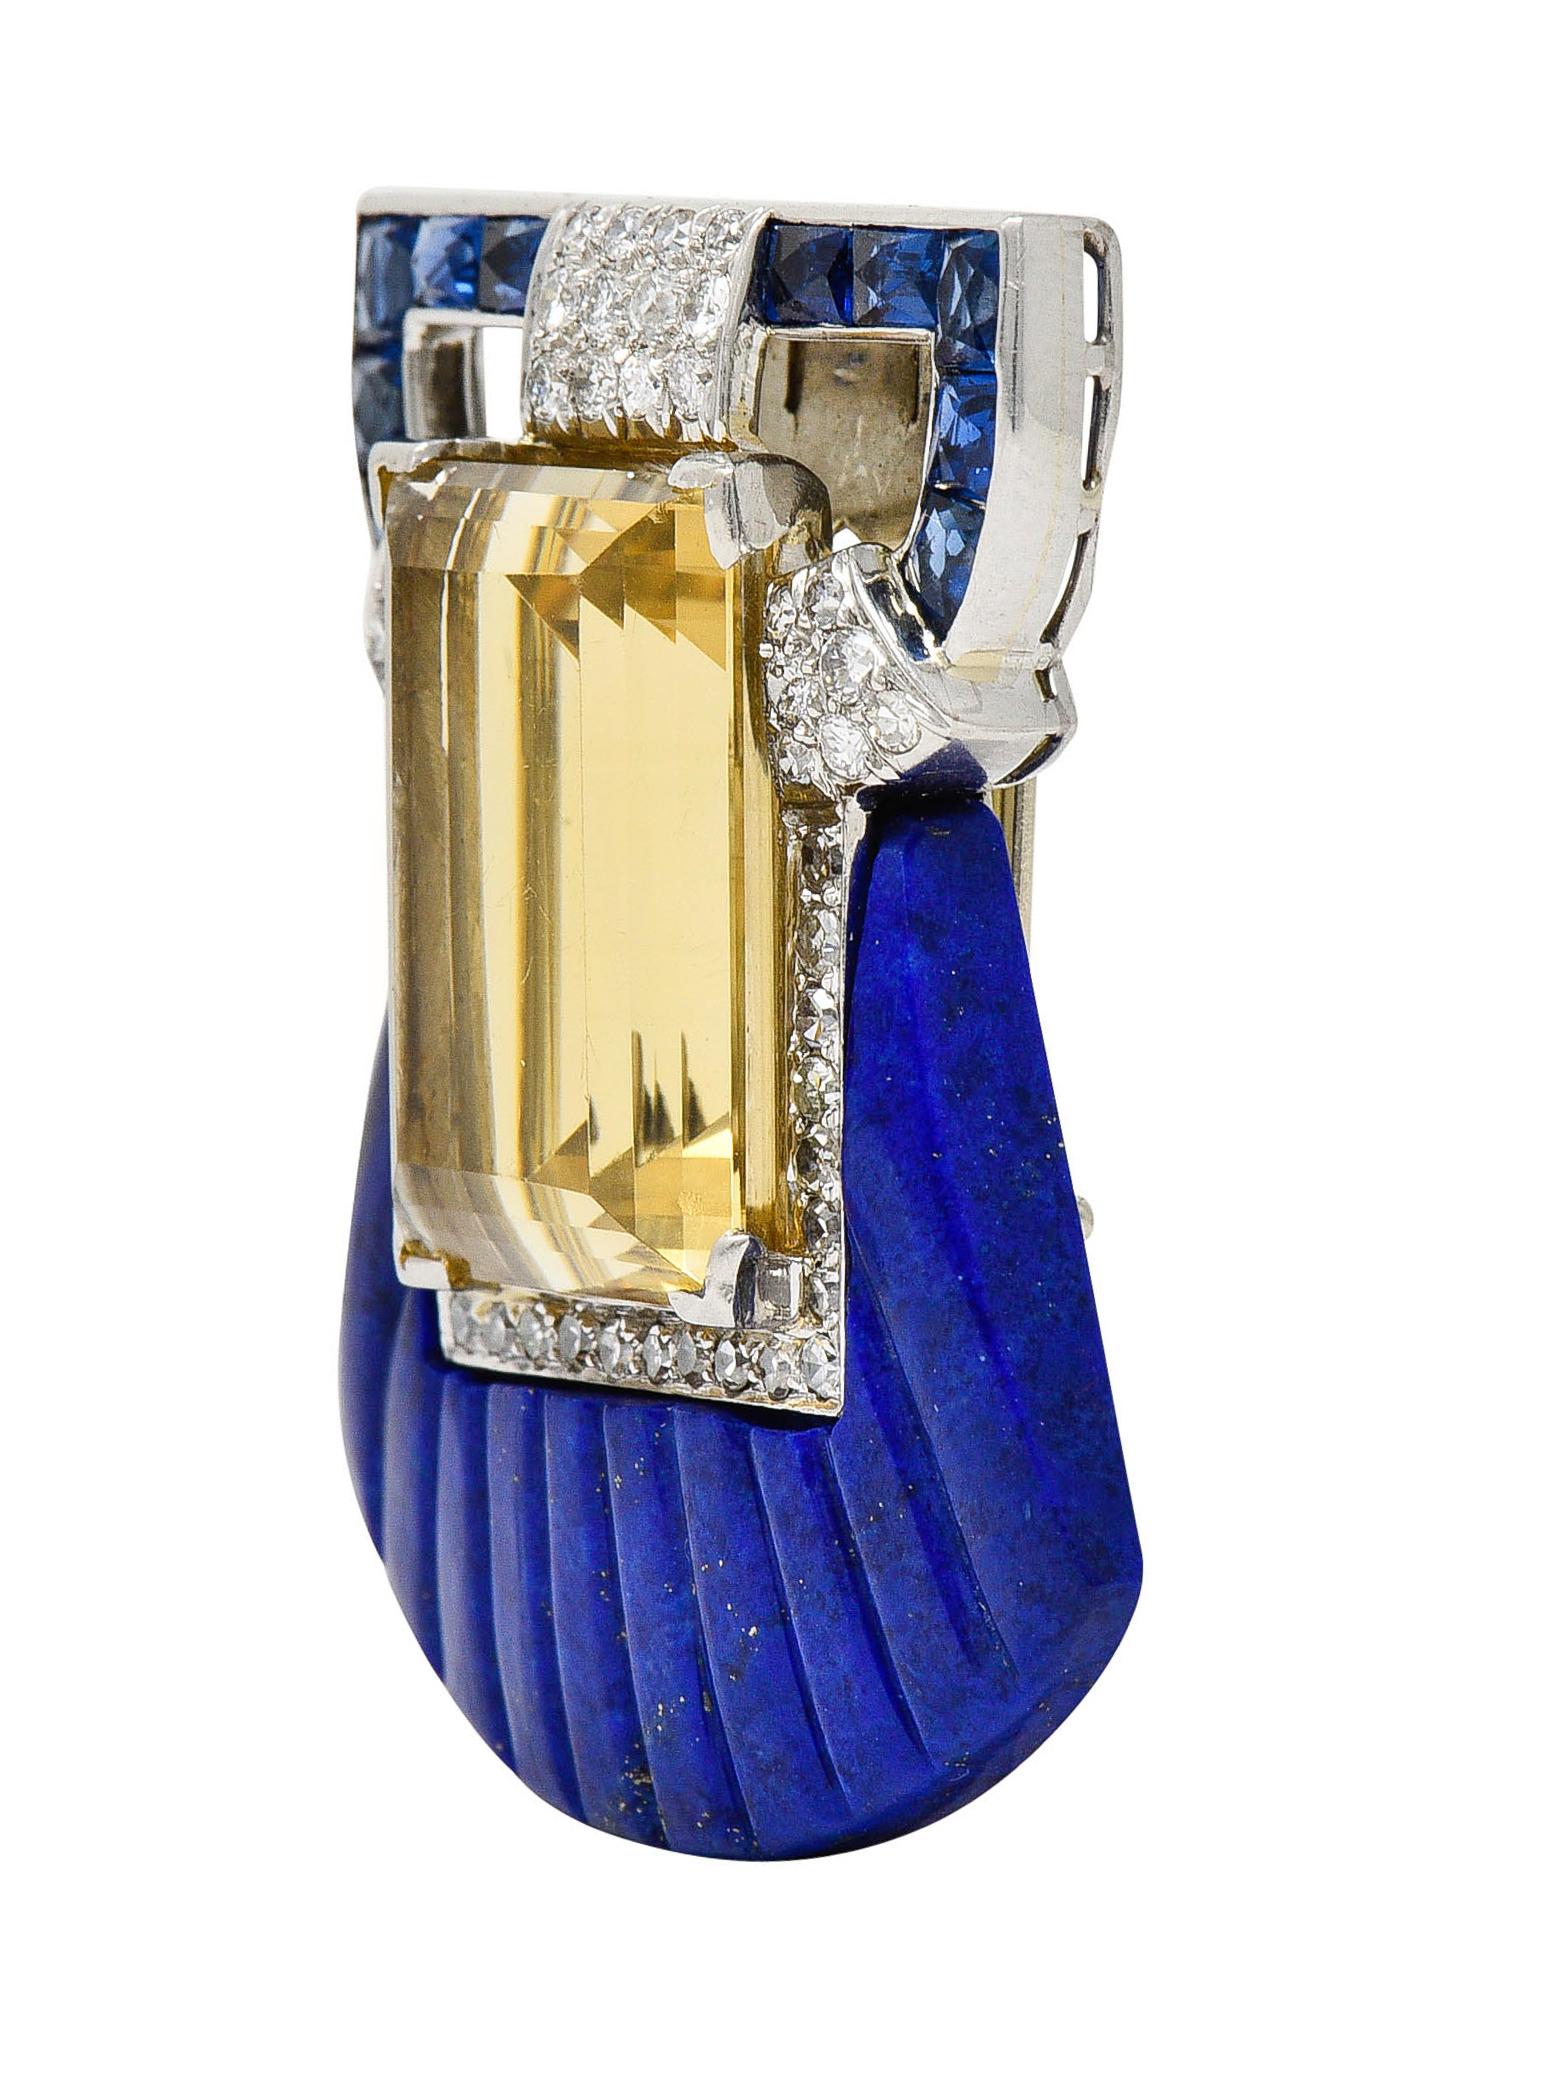 Brooch clip is formed as a stylized scallop shell

With deeply fluted and carved flanges of lapis lazuli

Opaque with strong ultramarine blue color with mild mottling and some gold pyrite flecks

Centering a rectangular cut citrine measuring